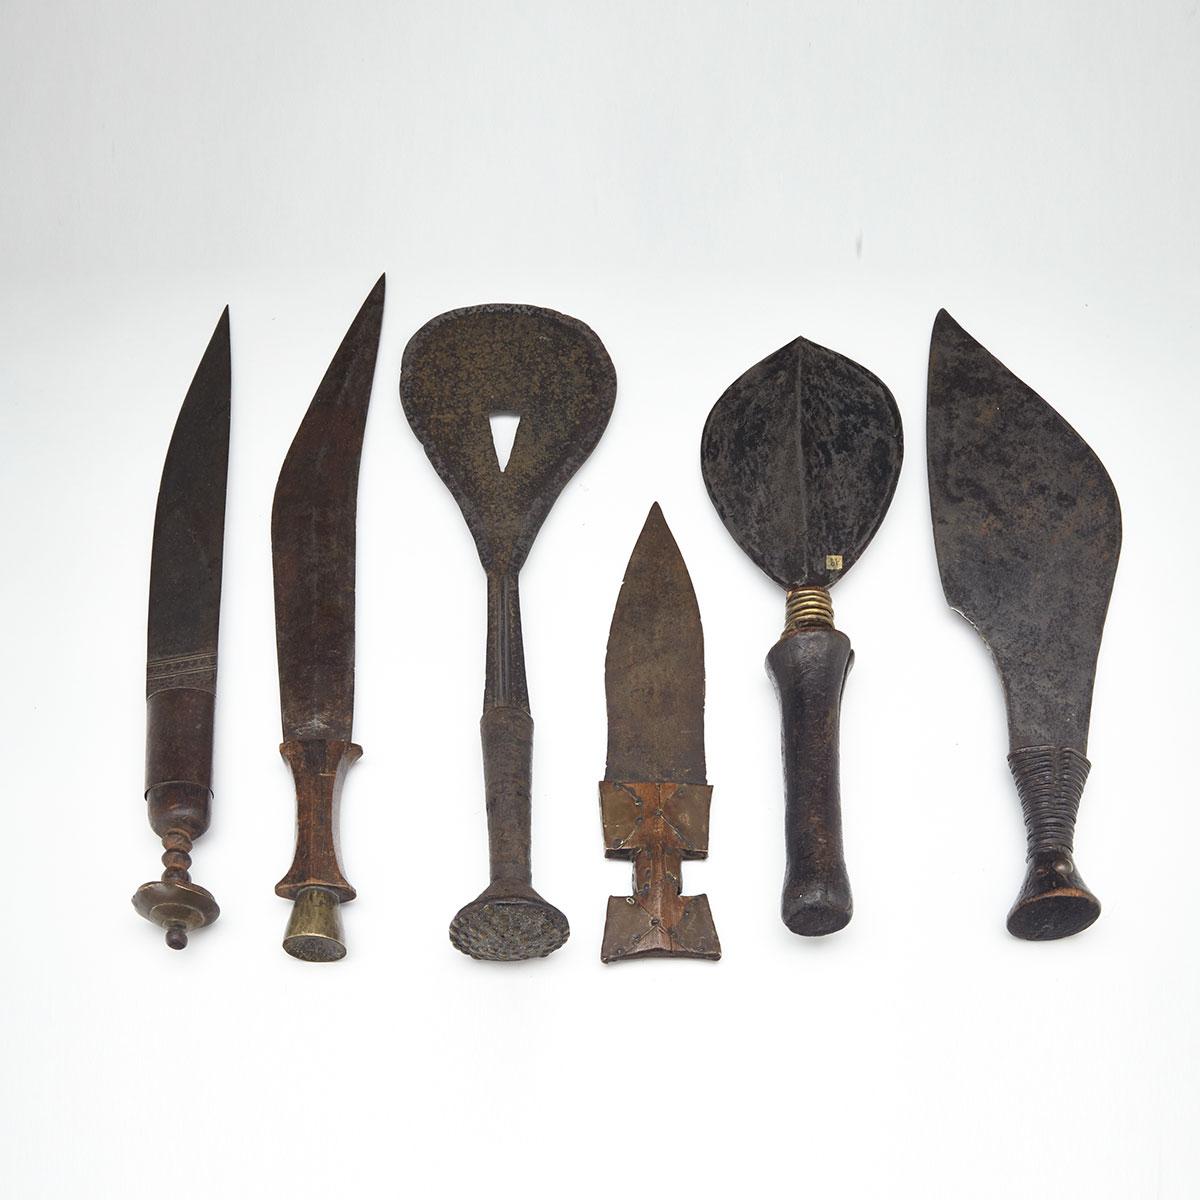 Six African Knives, 19th/20th century